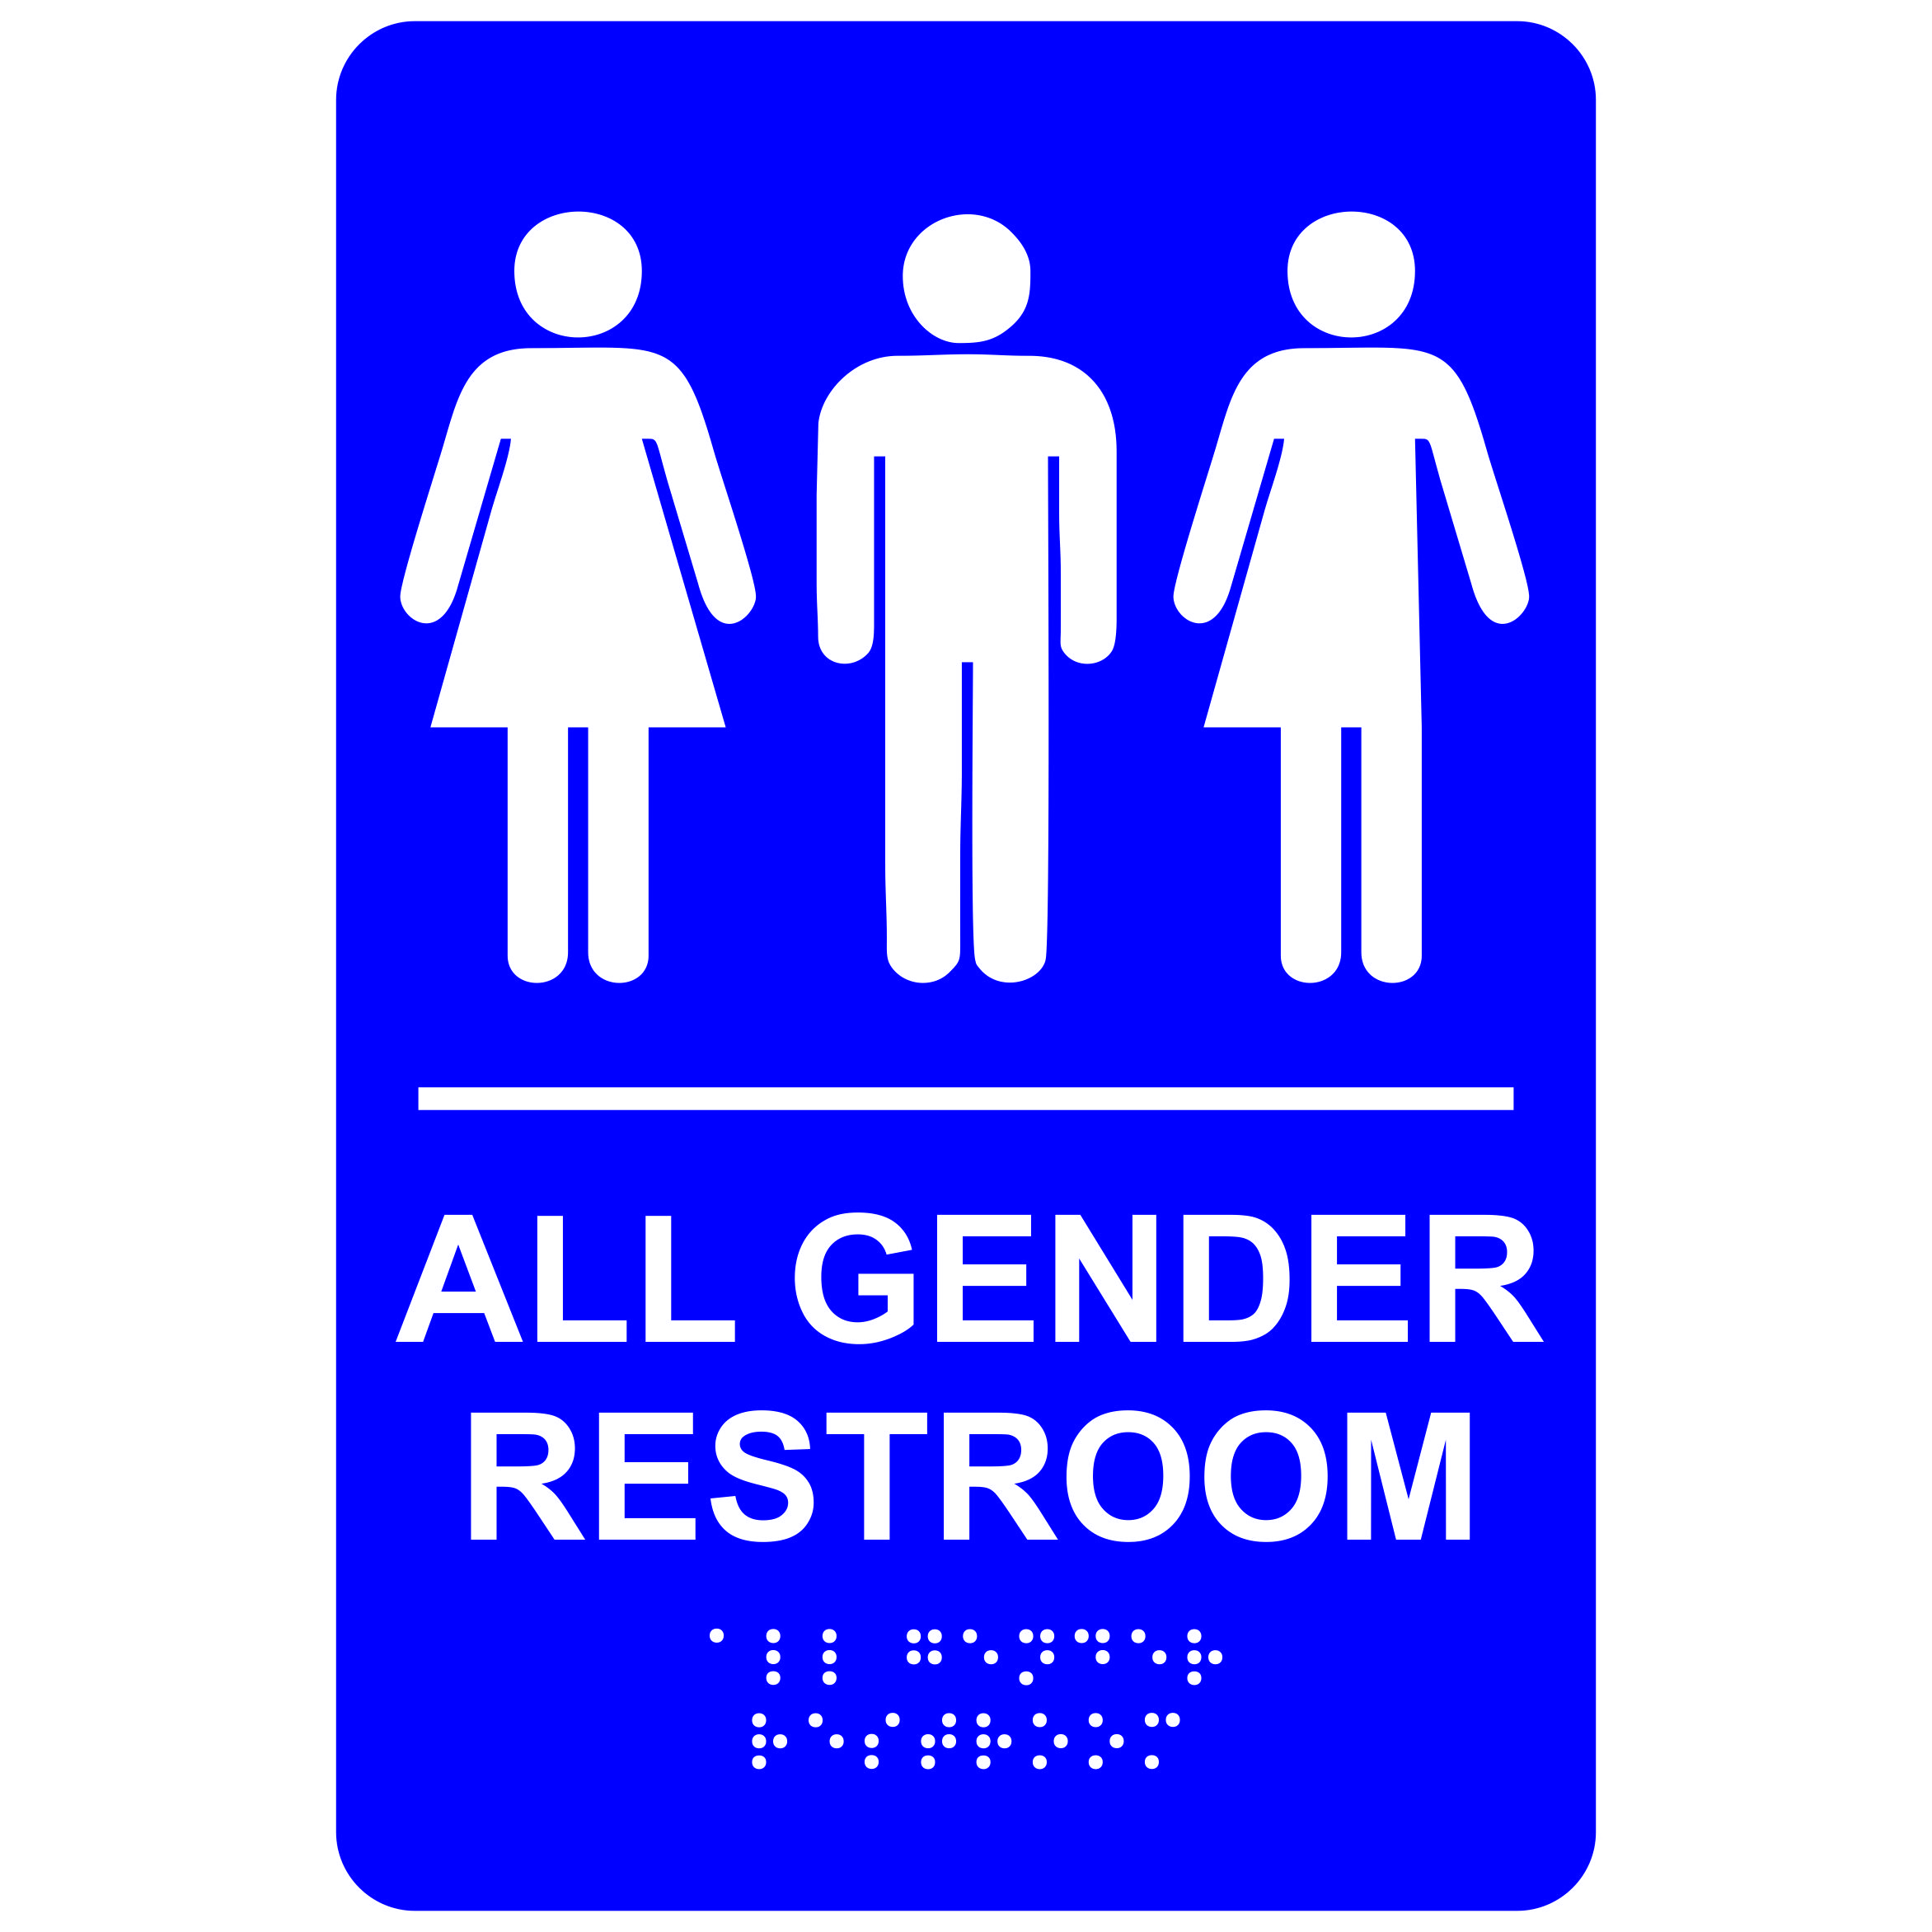 All Gender Restroom Economy ADA signs with Braille